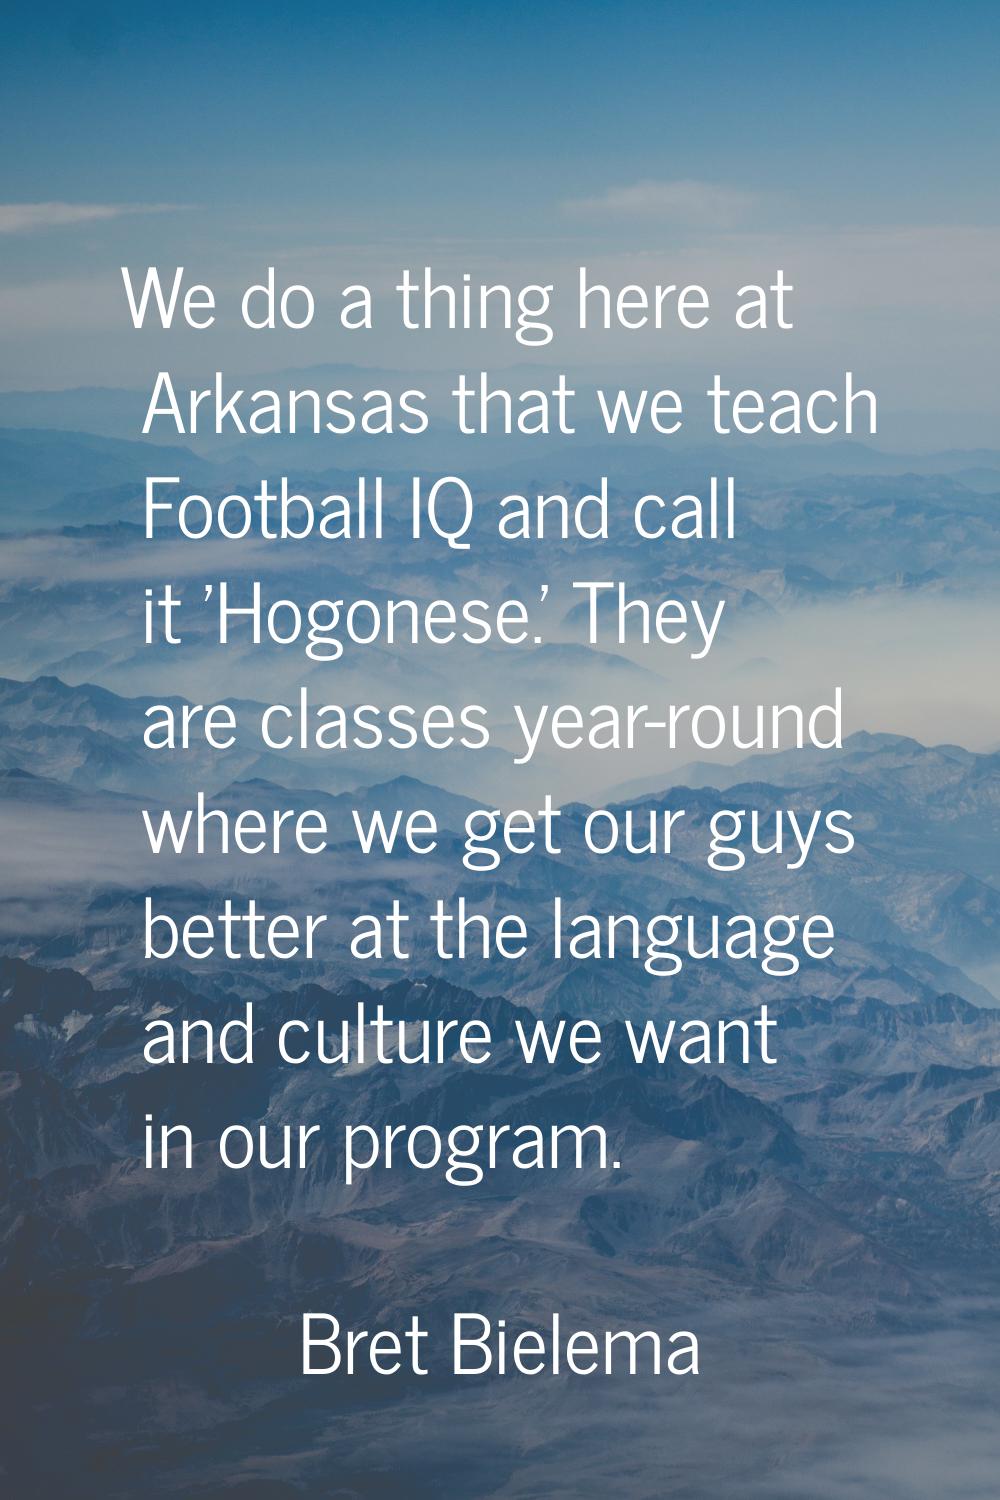 We do a thing here at Arkansas that we teach Football IQ and call it 'Hogonese.' They are classes y